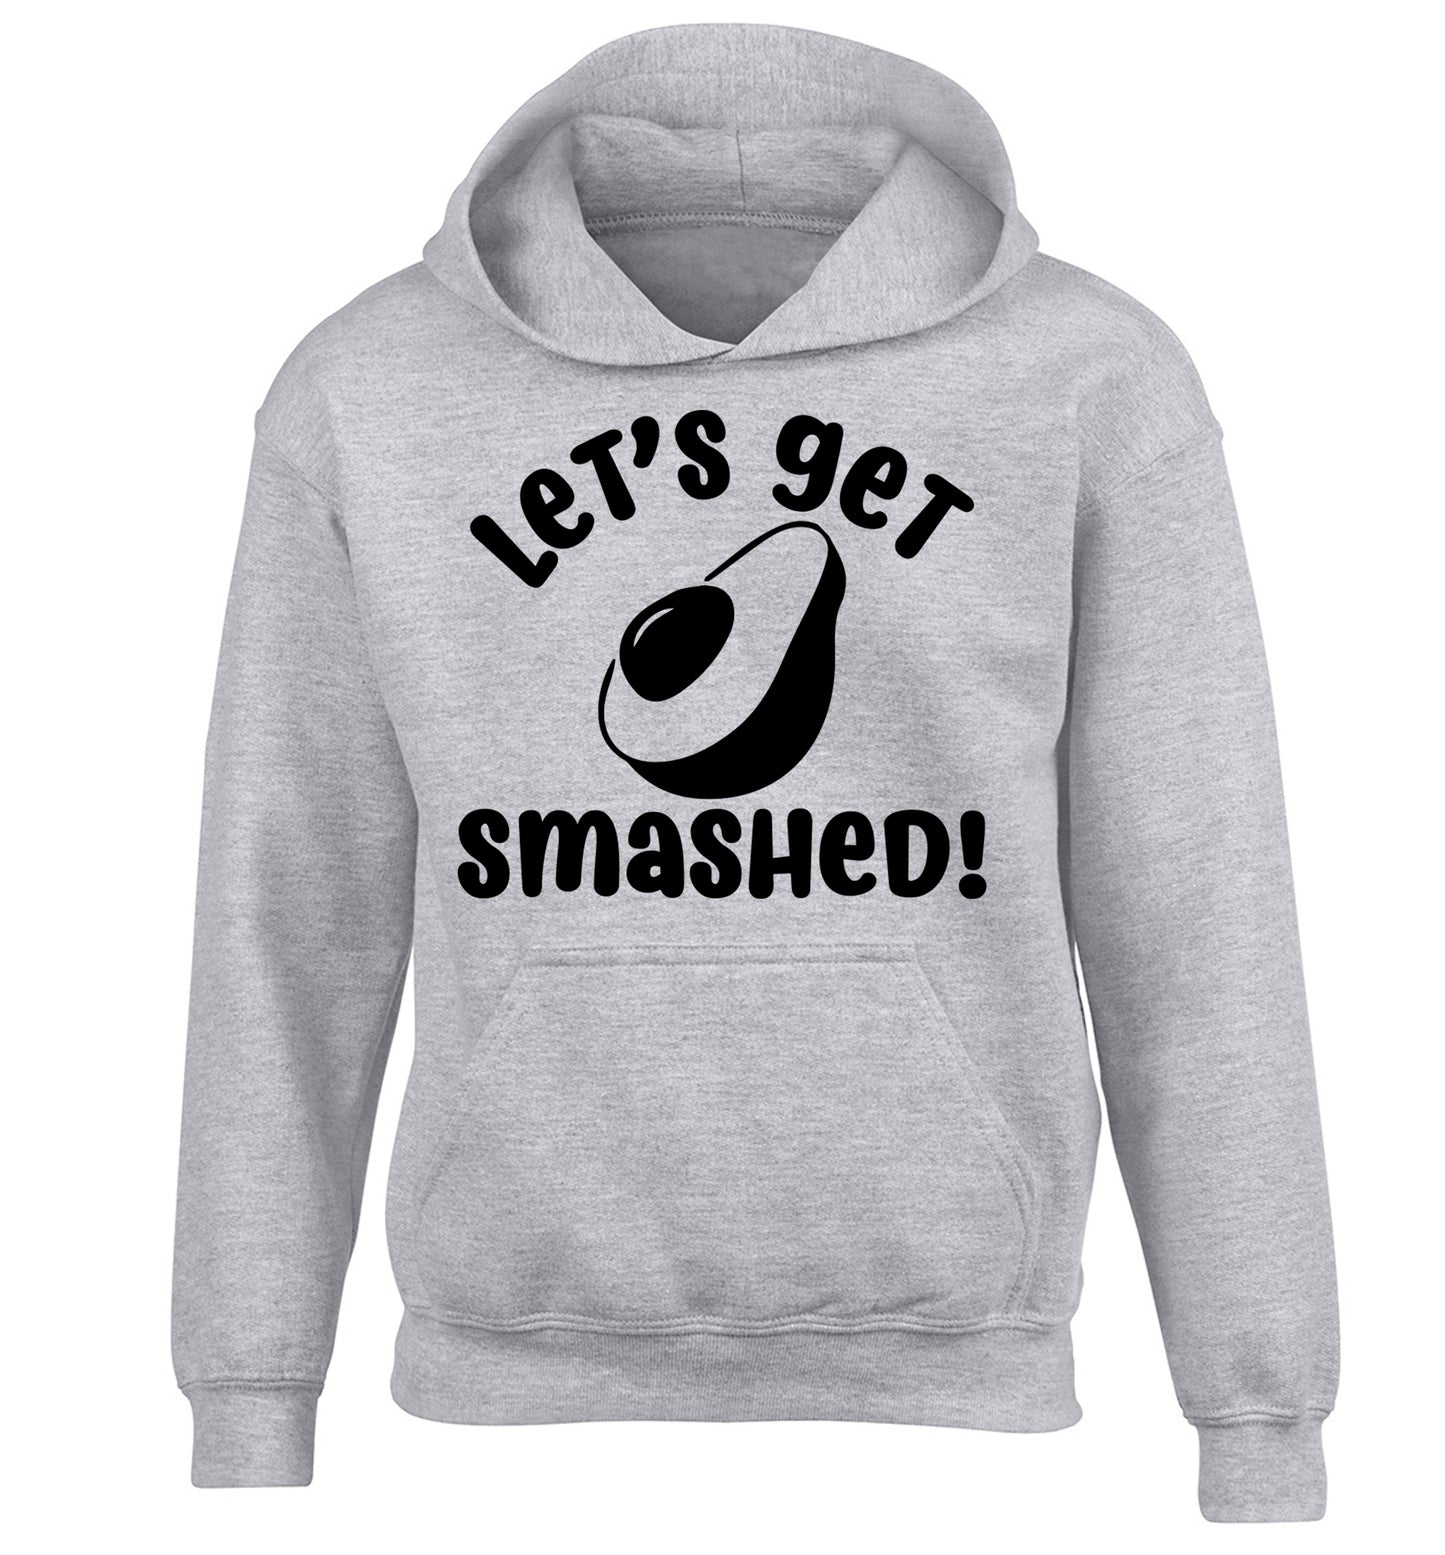 Let's get smashed children's grey hoodie 12-14 Years